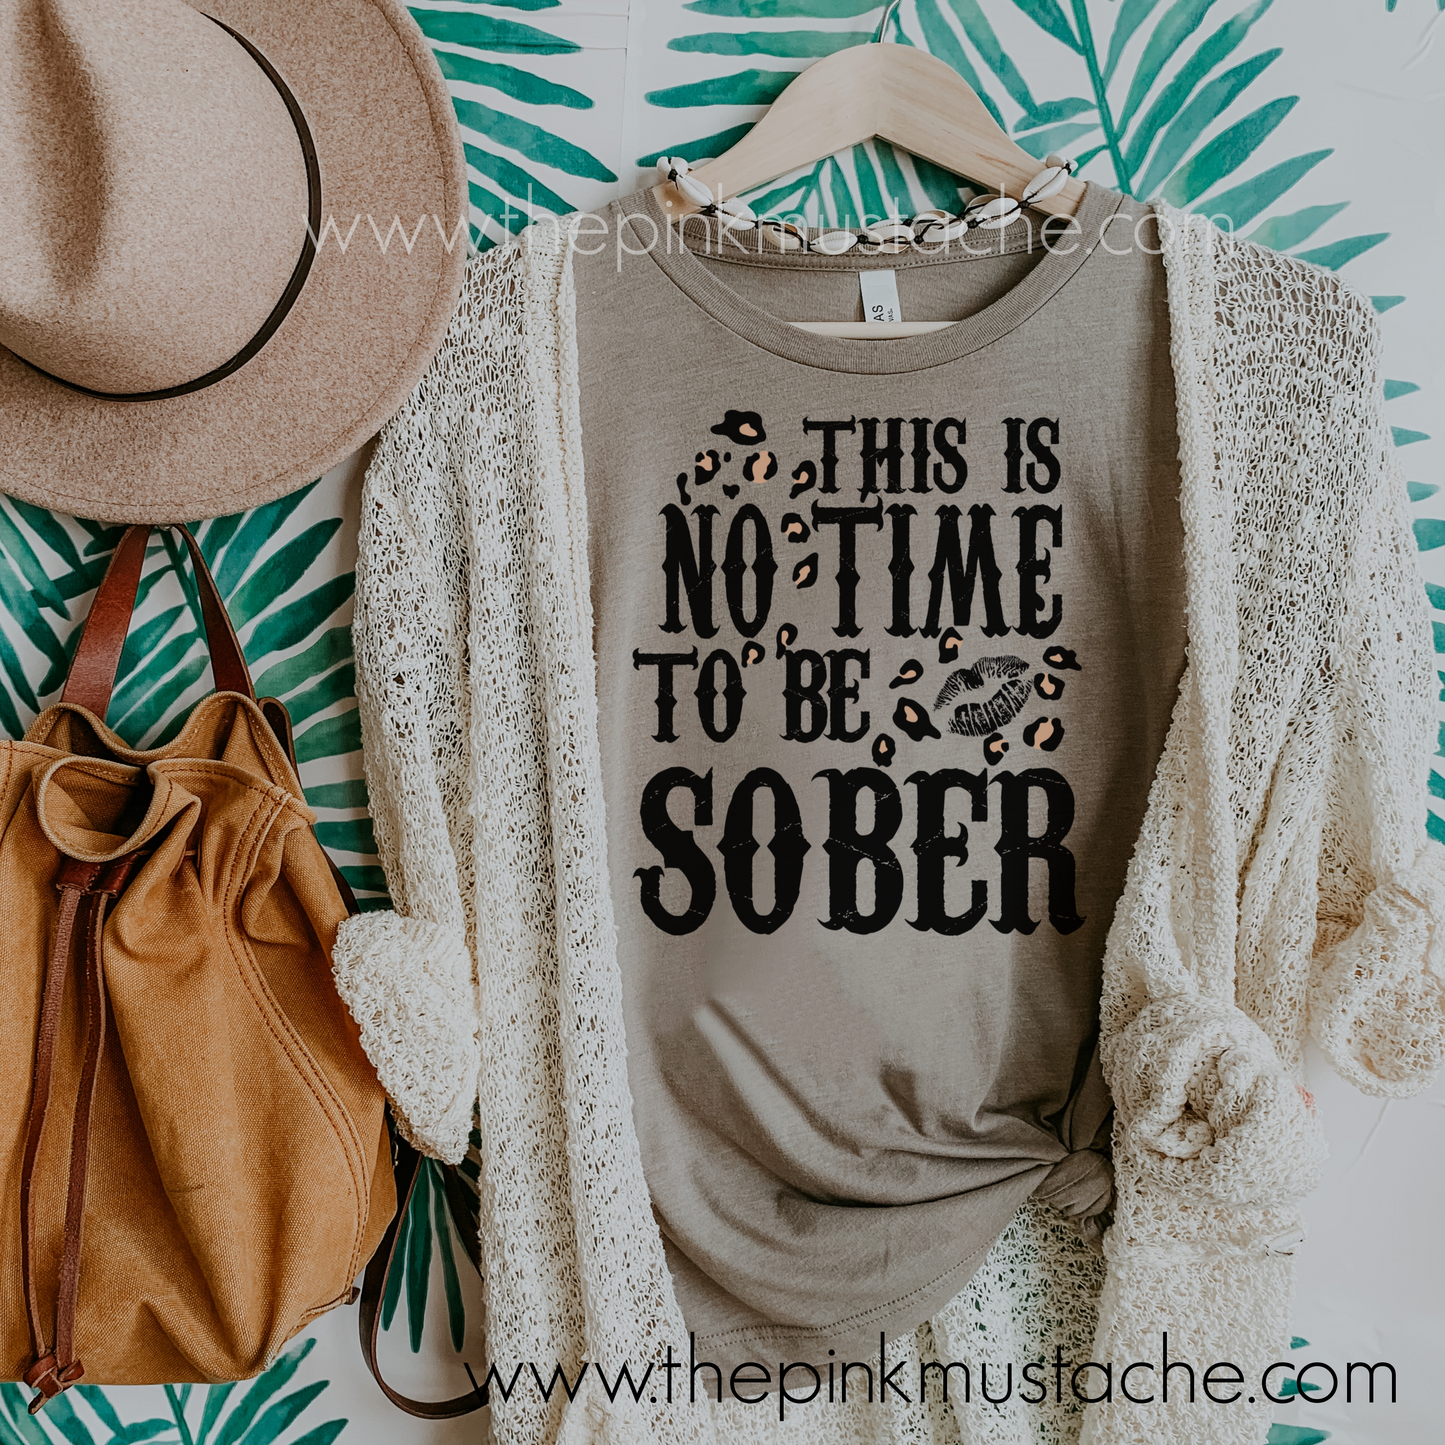 This Is No Time To Be Sober - Funny Tees for Women - Boutique Bella Canvas Tees